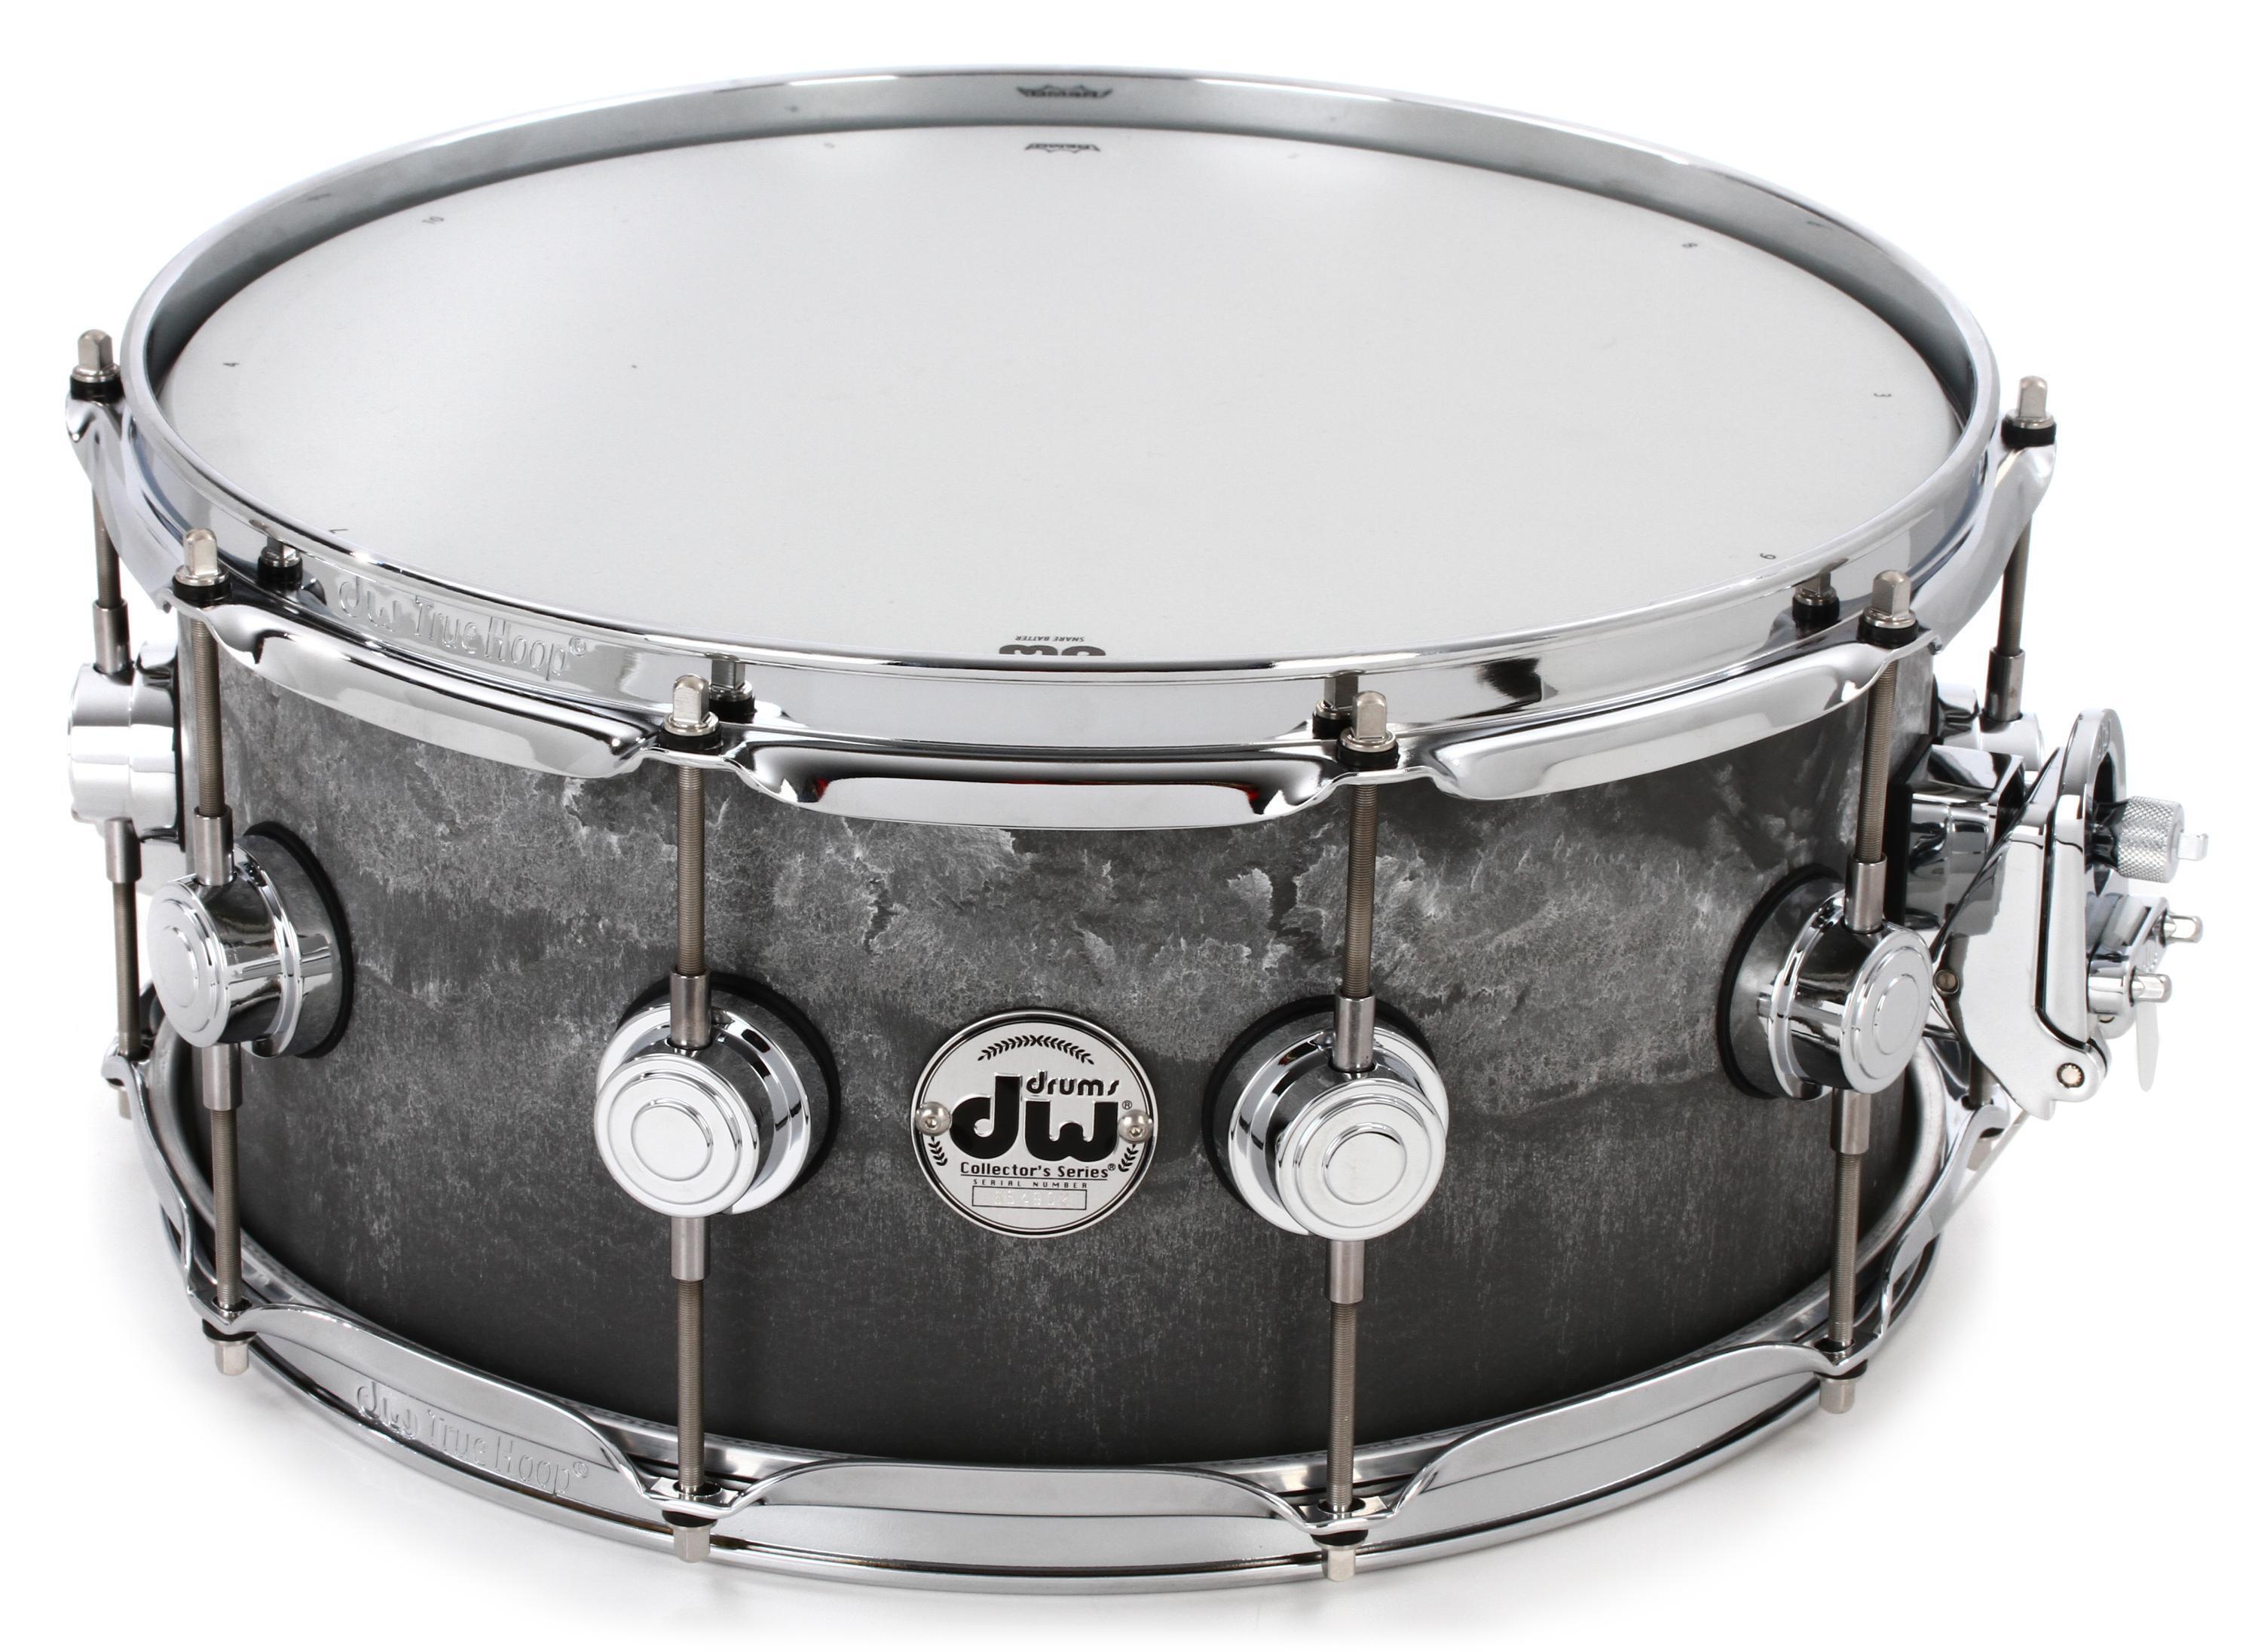 DW Limited-edition Collector's Series Maple Snare Drum - 6.5 inch 